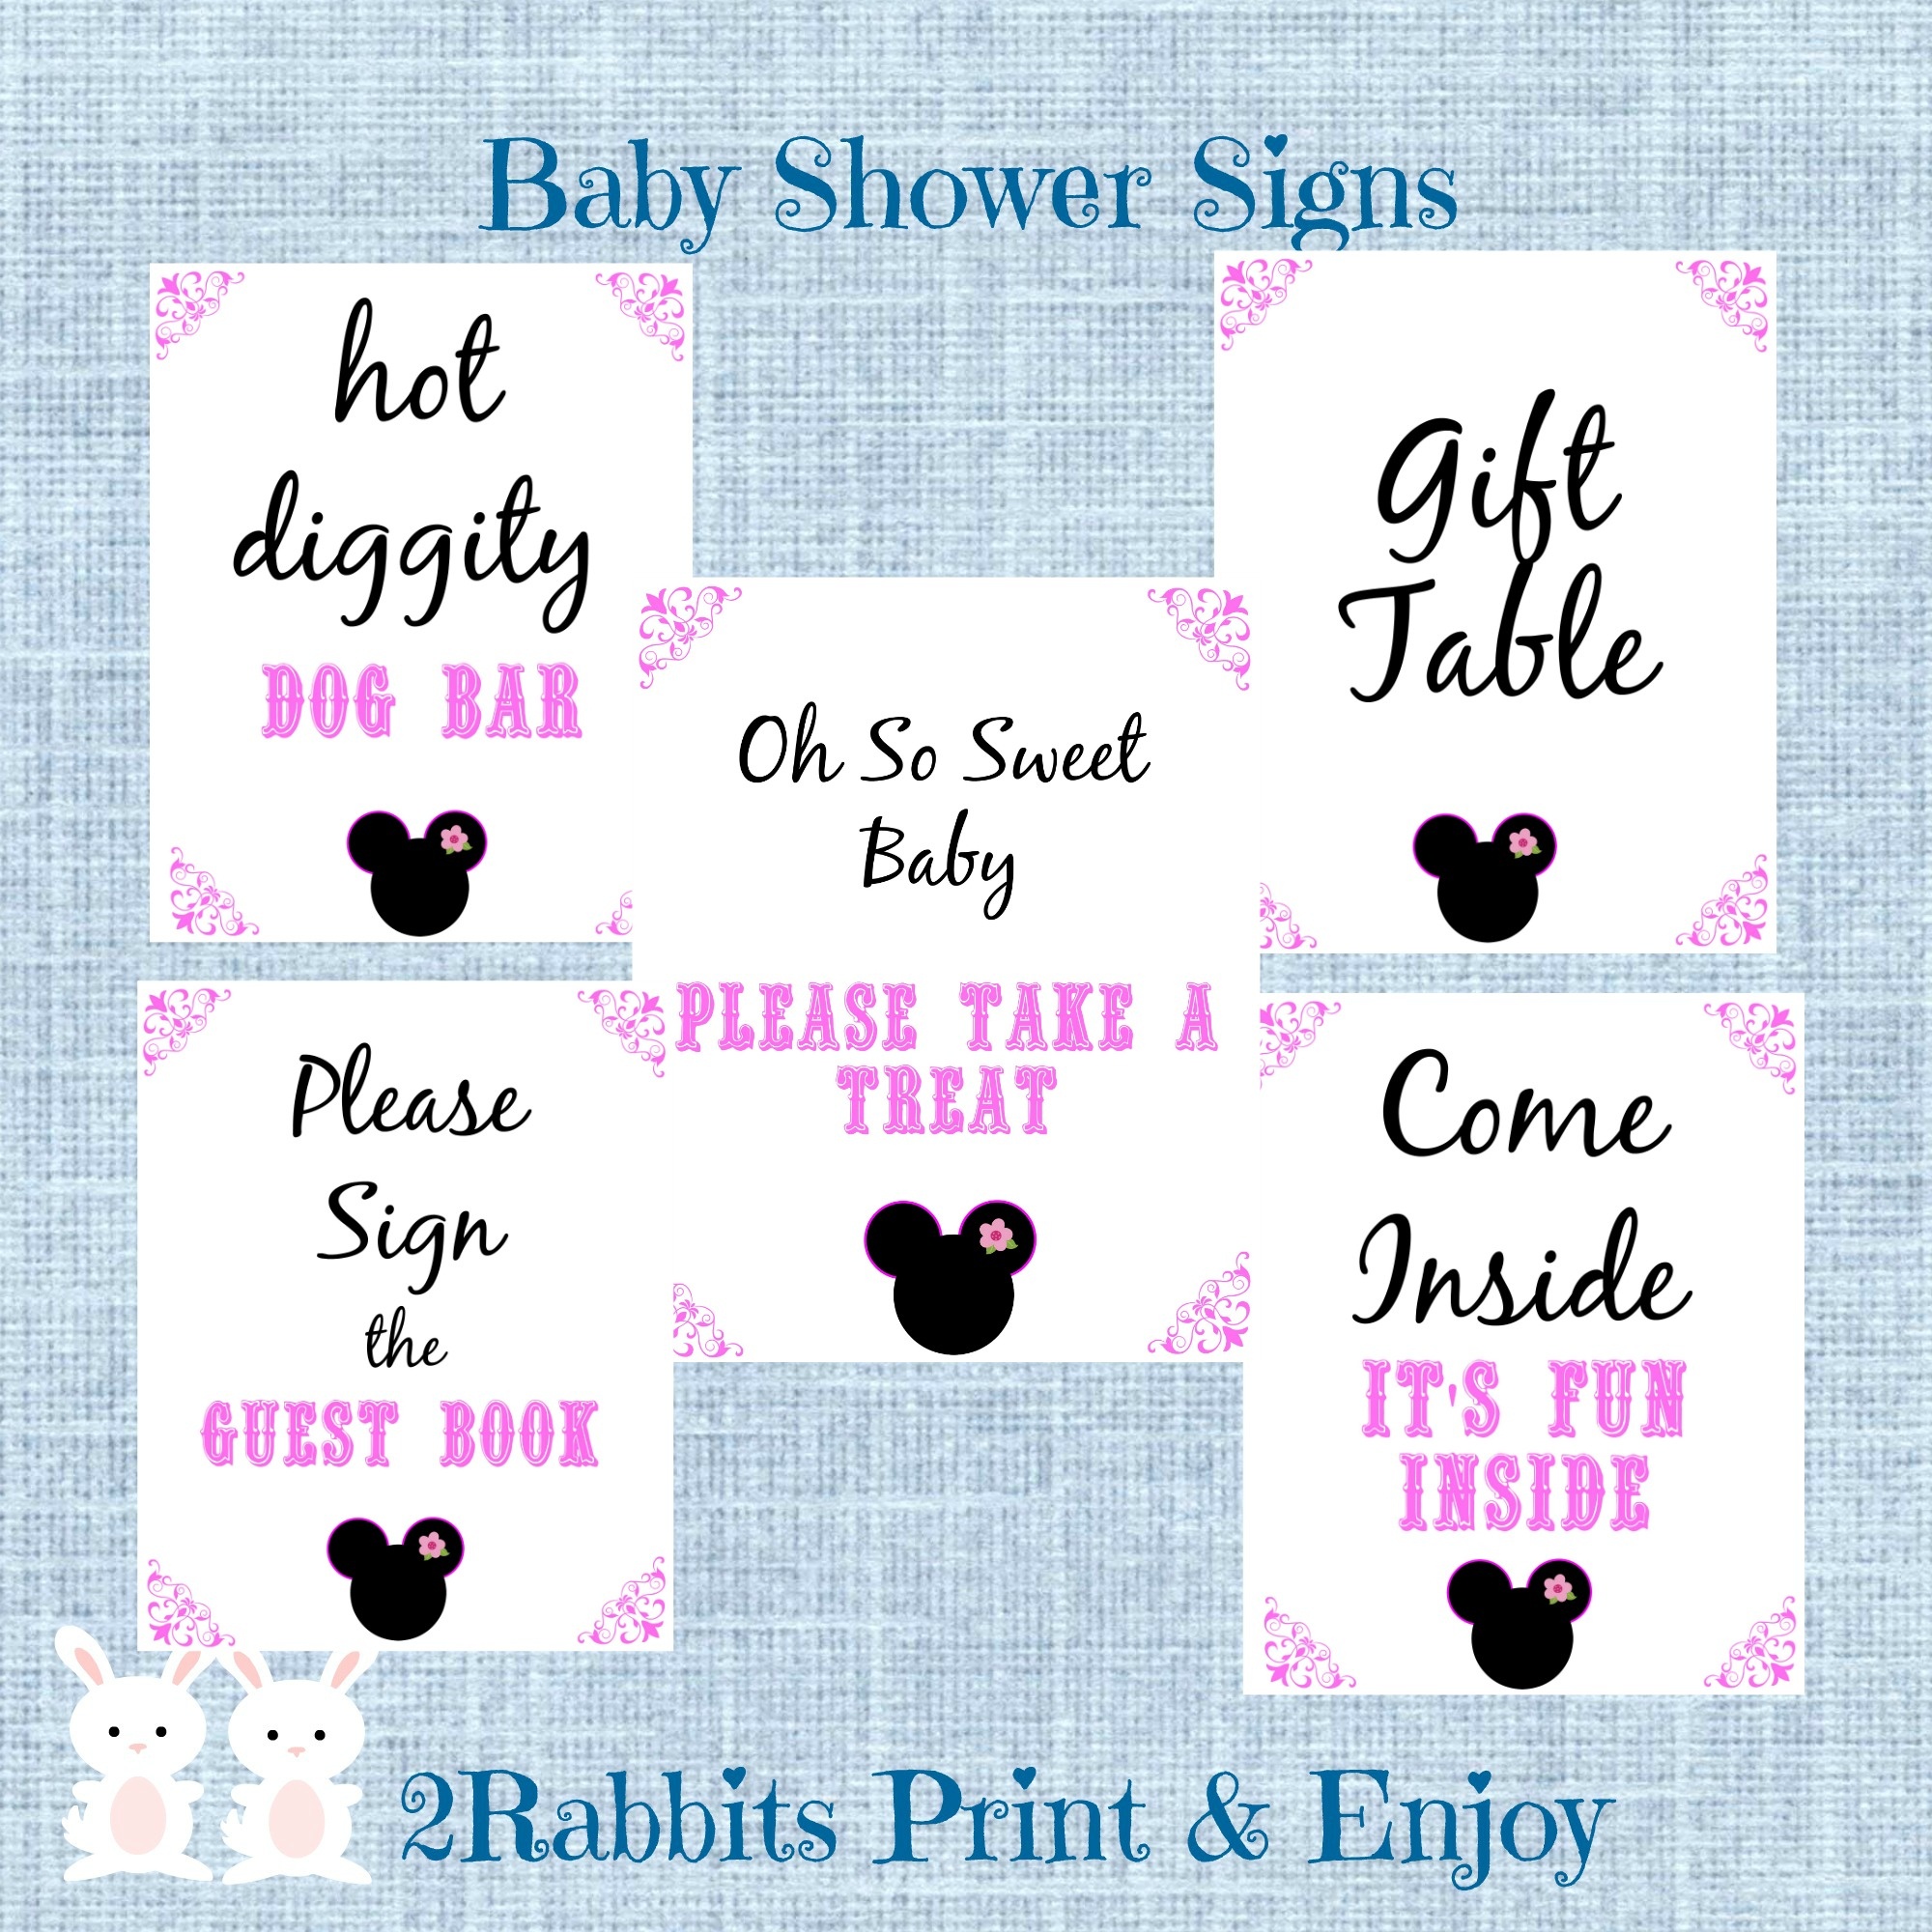 Mickey Mouse Babyshower Ideas - My Practical Baby Shower Guide - Free Printable Mickey Mouse Baby Shower Games